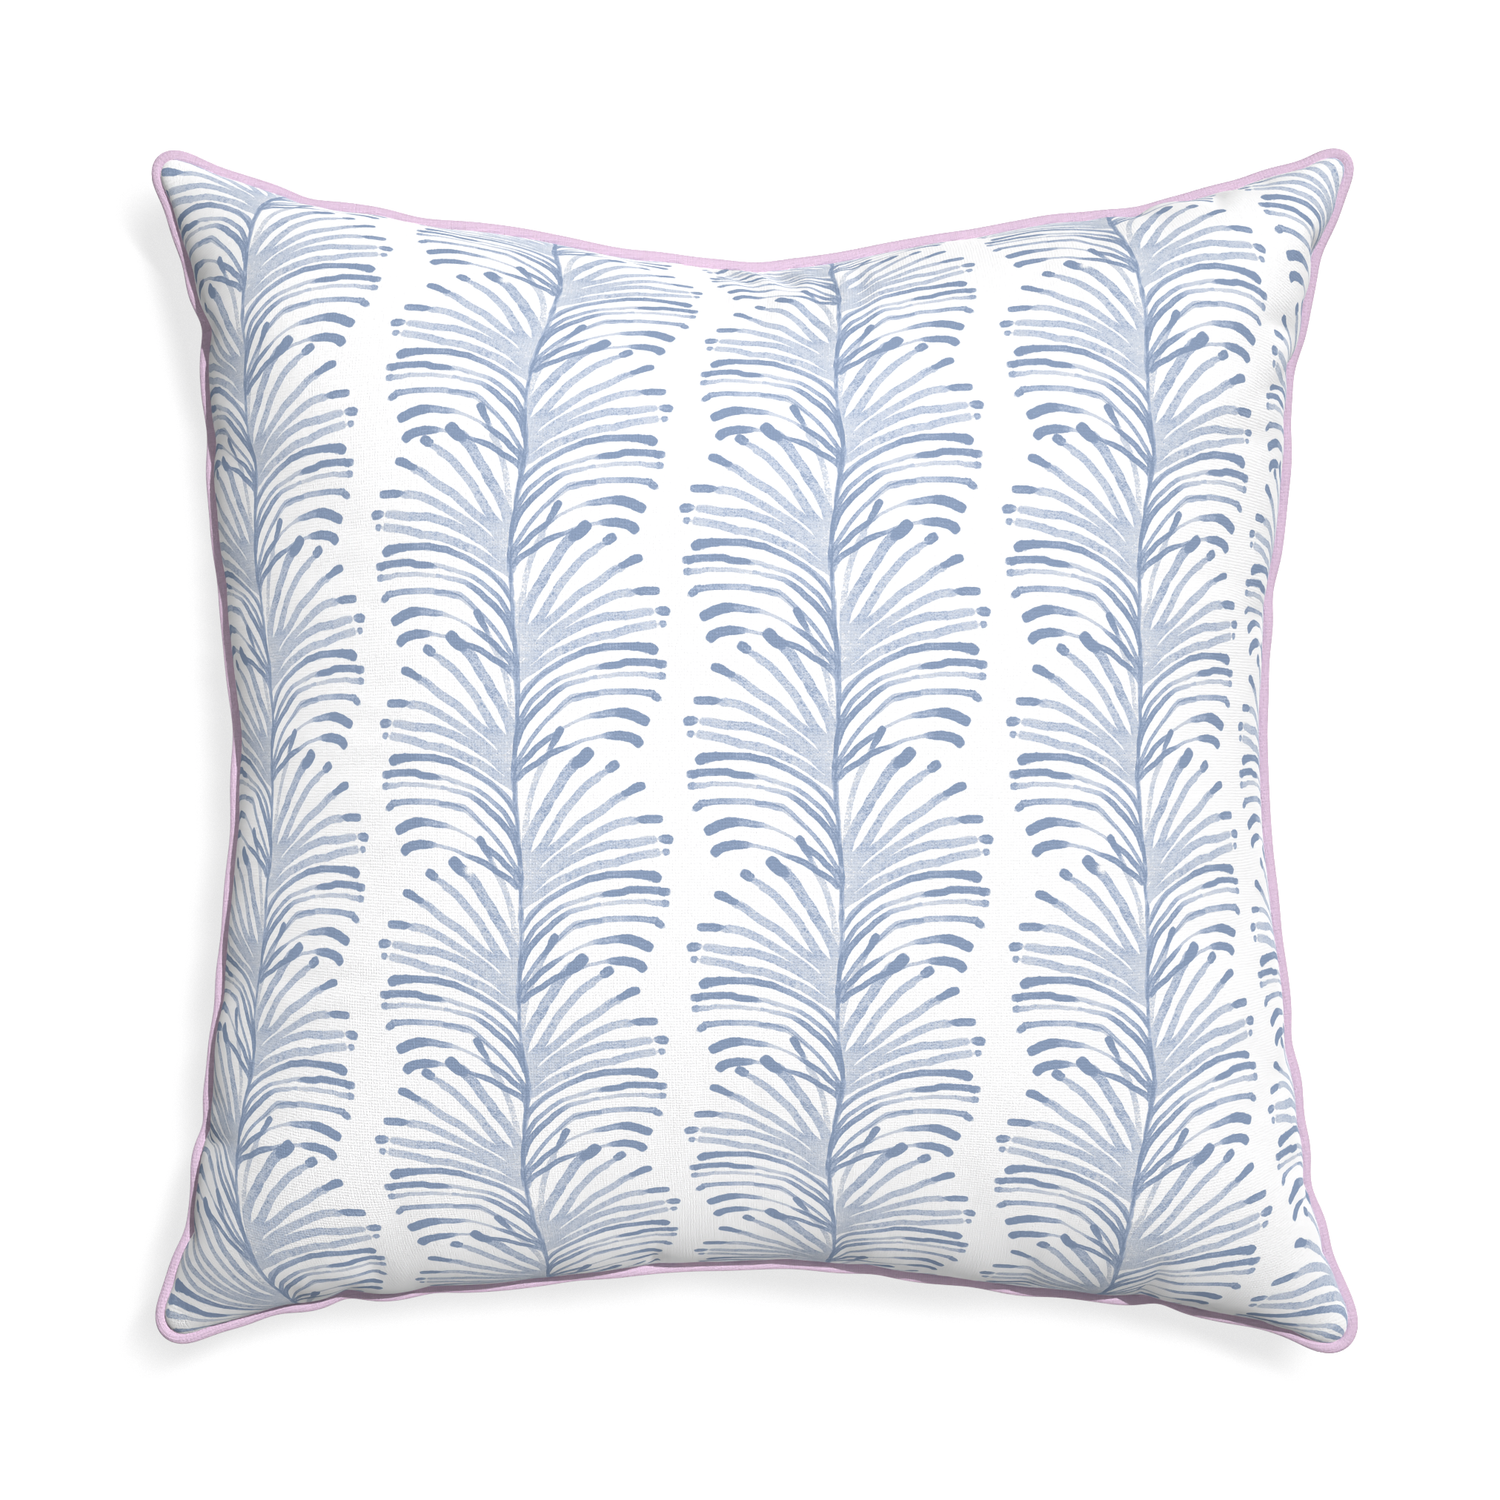 Euro-sham emma sky custom pillow with l piping on white background